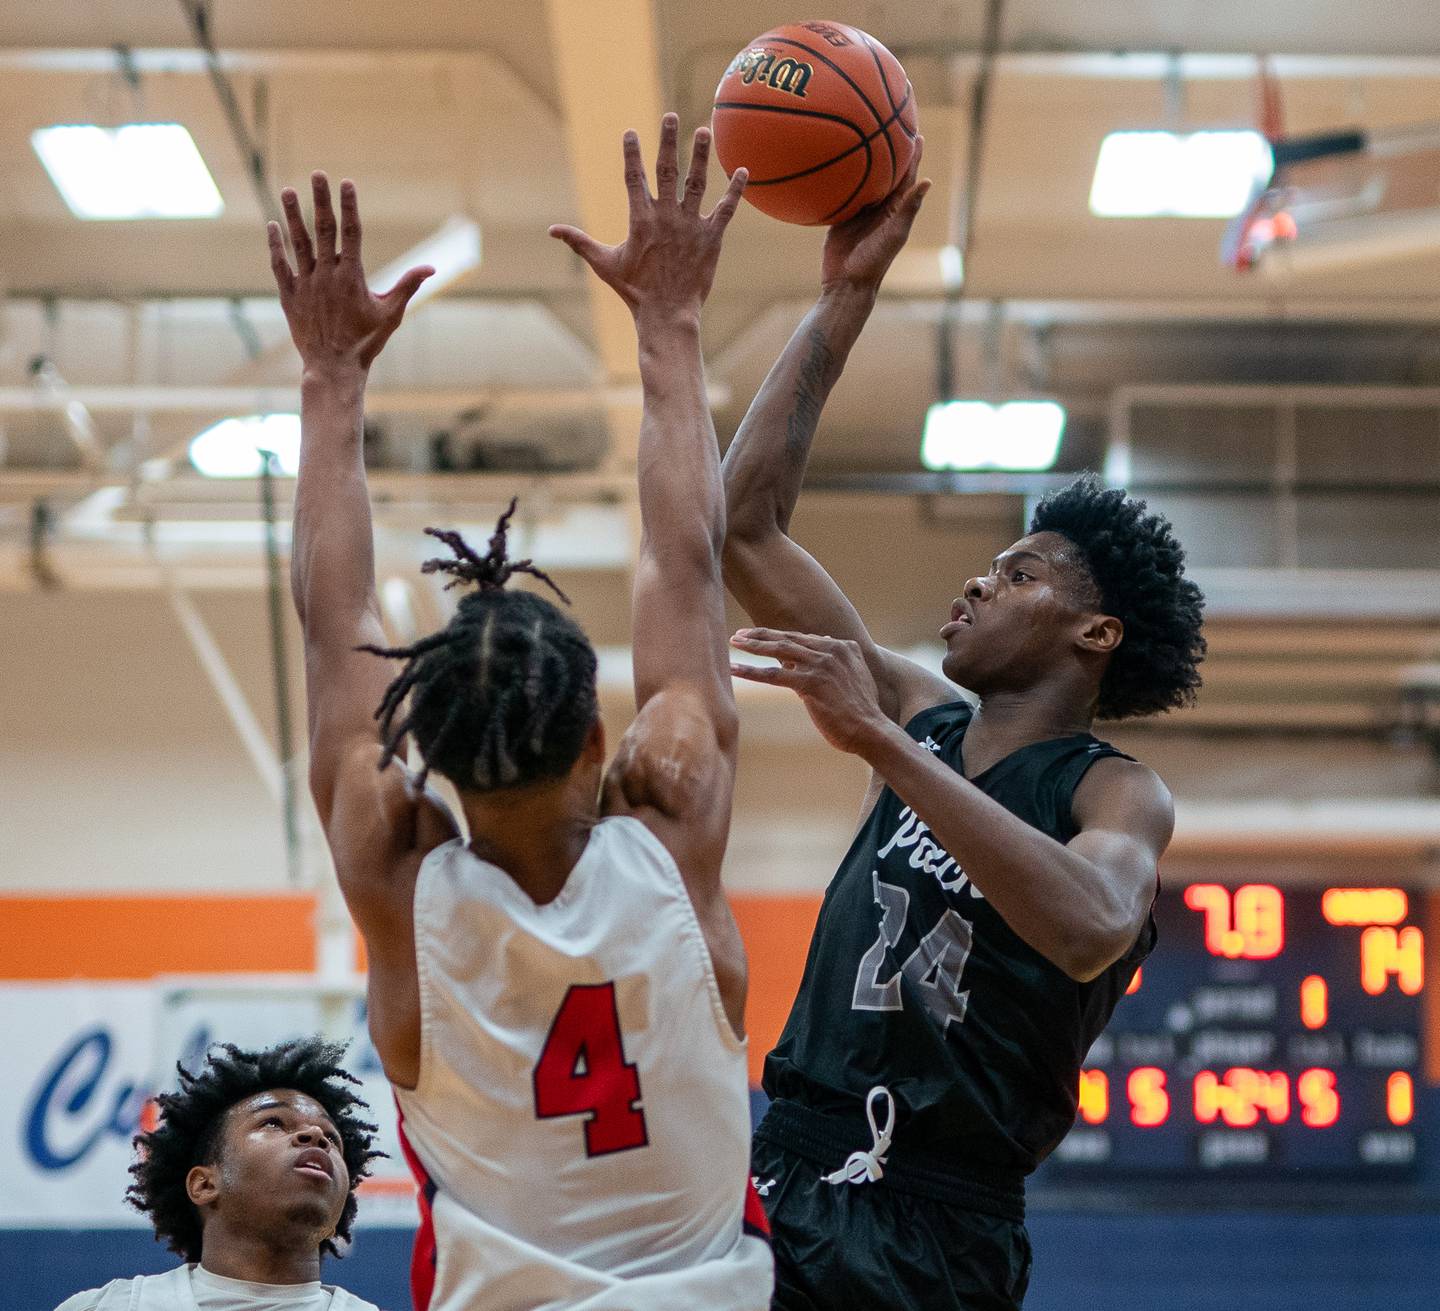 Oswego East's Mekhi Lowery (24) shoots the ball in the post against West Aurora's Joshua Pickett (4) during the hoops for healing basketball tournament at Oswego High School on Friday, Nov 25, 2022.